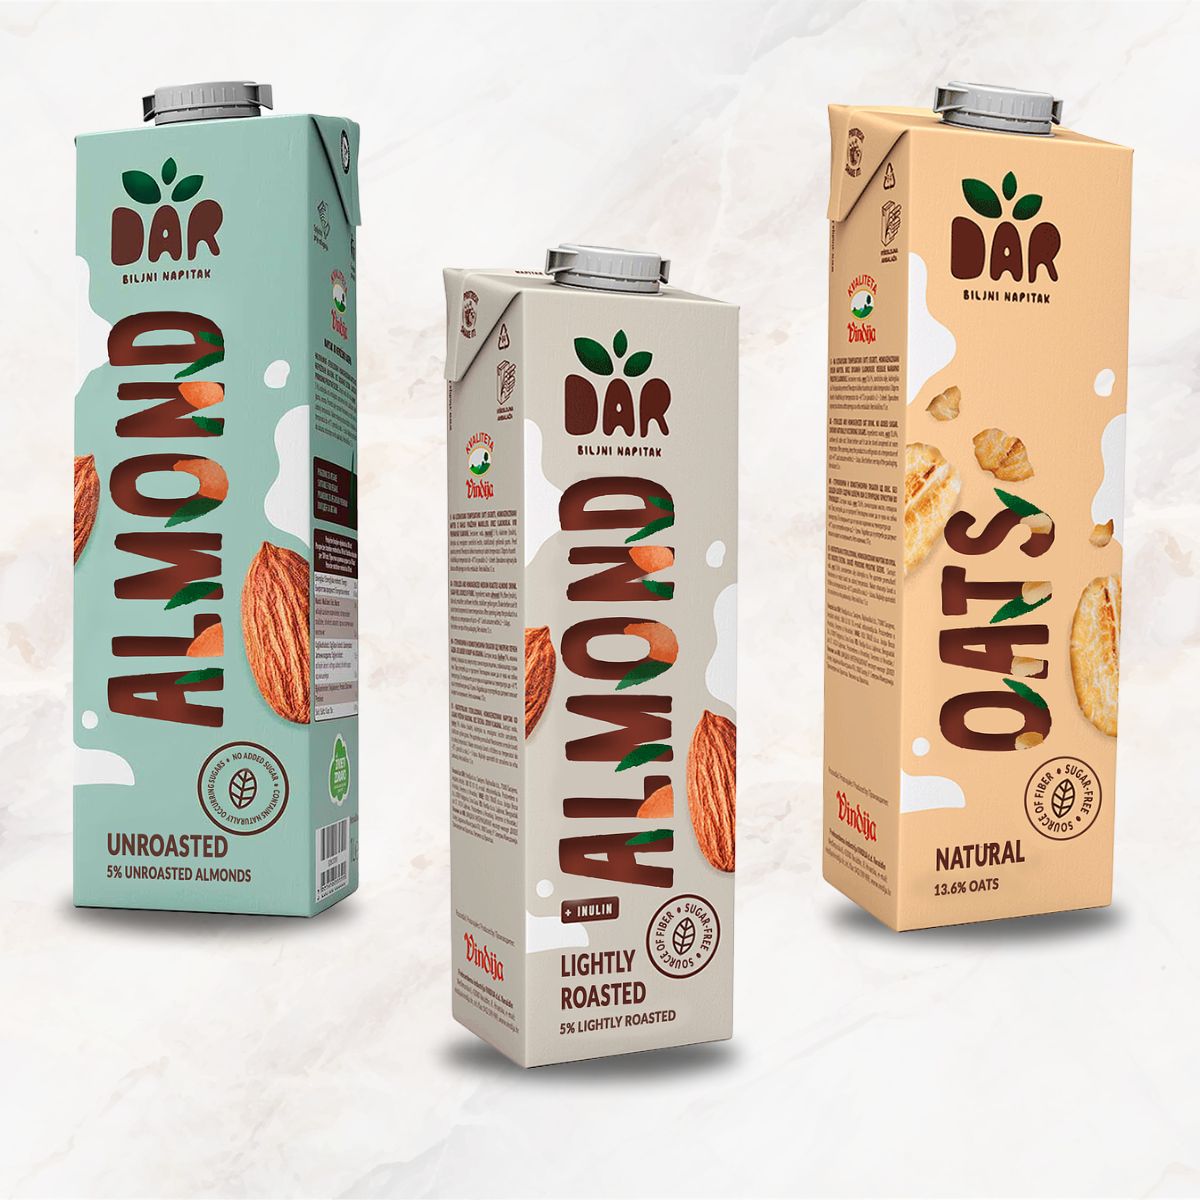 🌱 Dive into dairy-free deliciousness with our plant-based milk range! Creamy, nutritious, and cruelty-free. 

Taste the difference! #PlantPower #DairyFreeDelights 🥛🌿